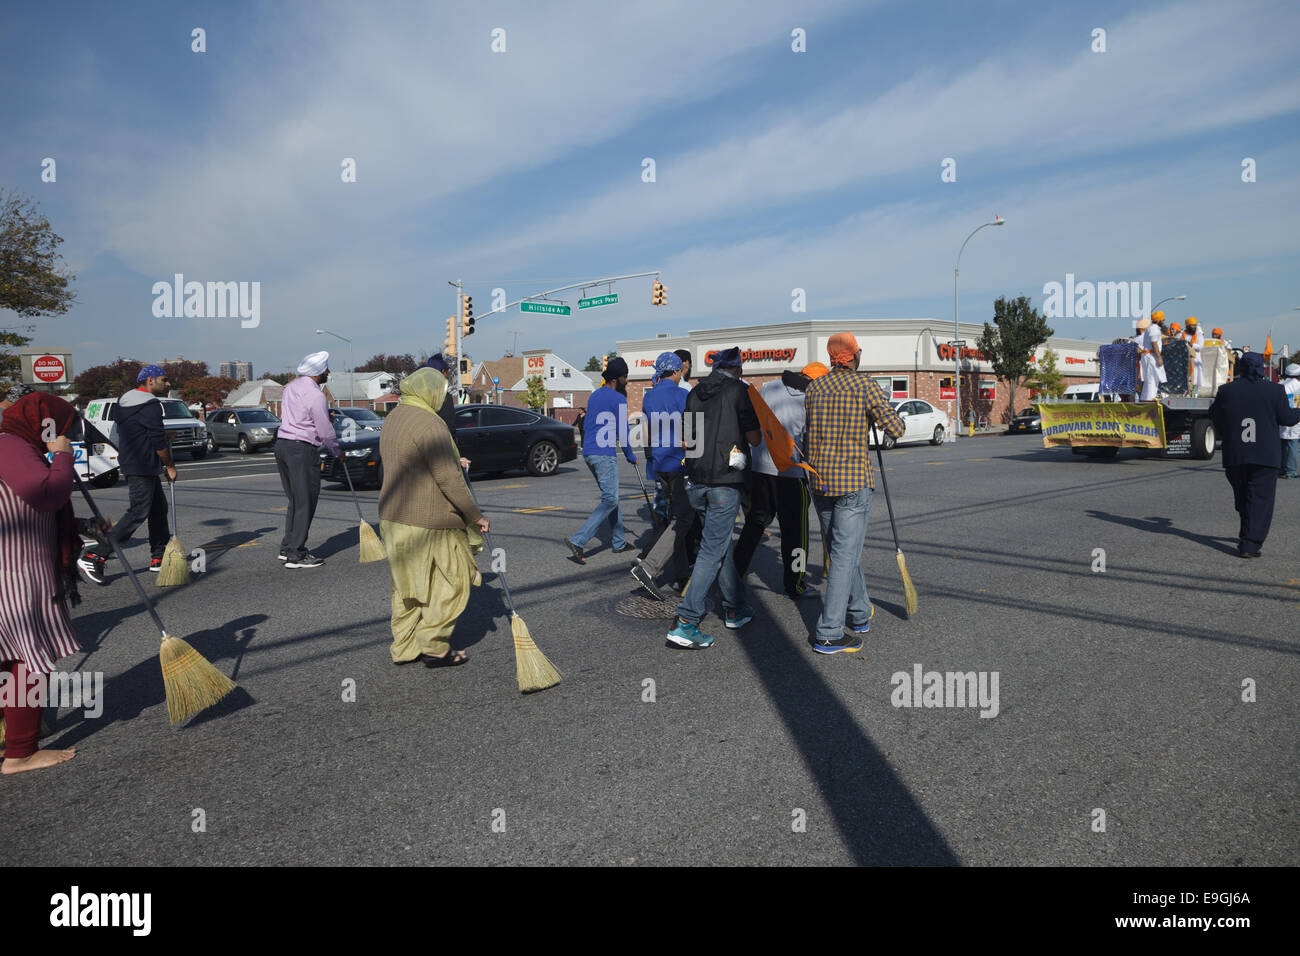 Floral Park, New York. 25th Oct, 2014. A parade in Floral Park, New York honoring the birthday of Guru Nanak Dev Ji, Master of the Sikh religion. Credit:  David Smith/Alamy Live News Stock Photo